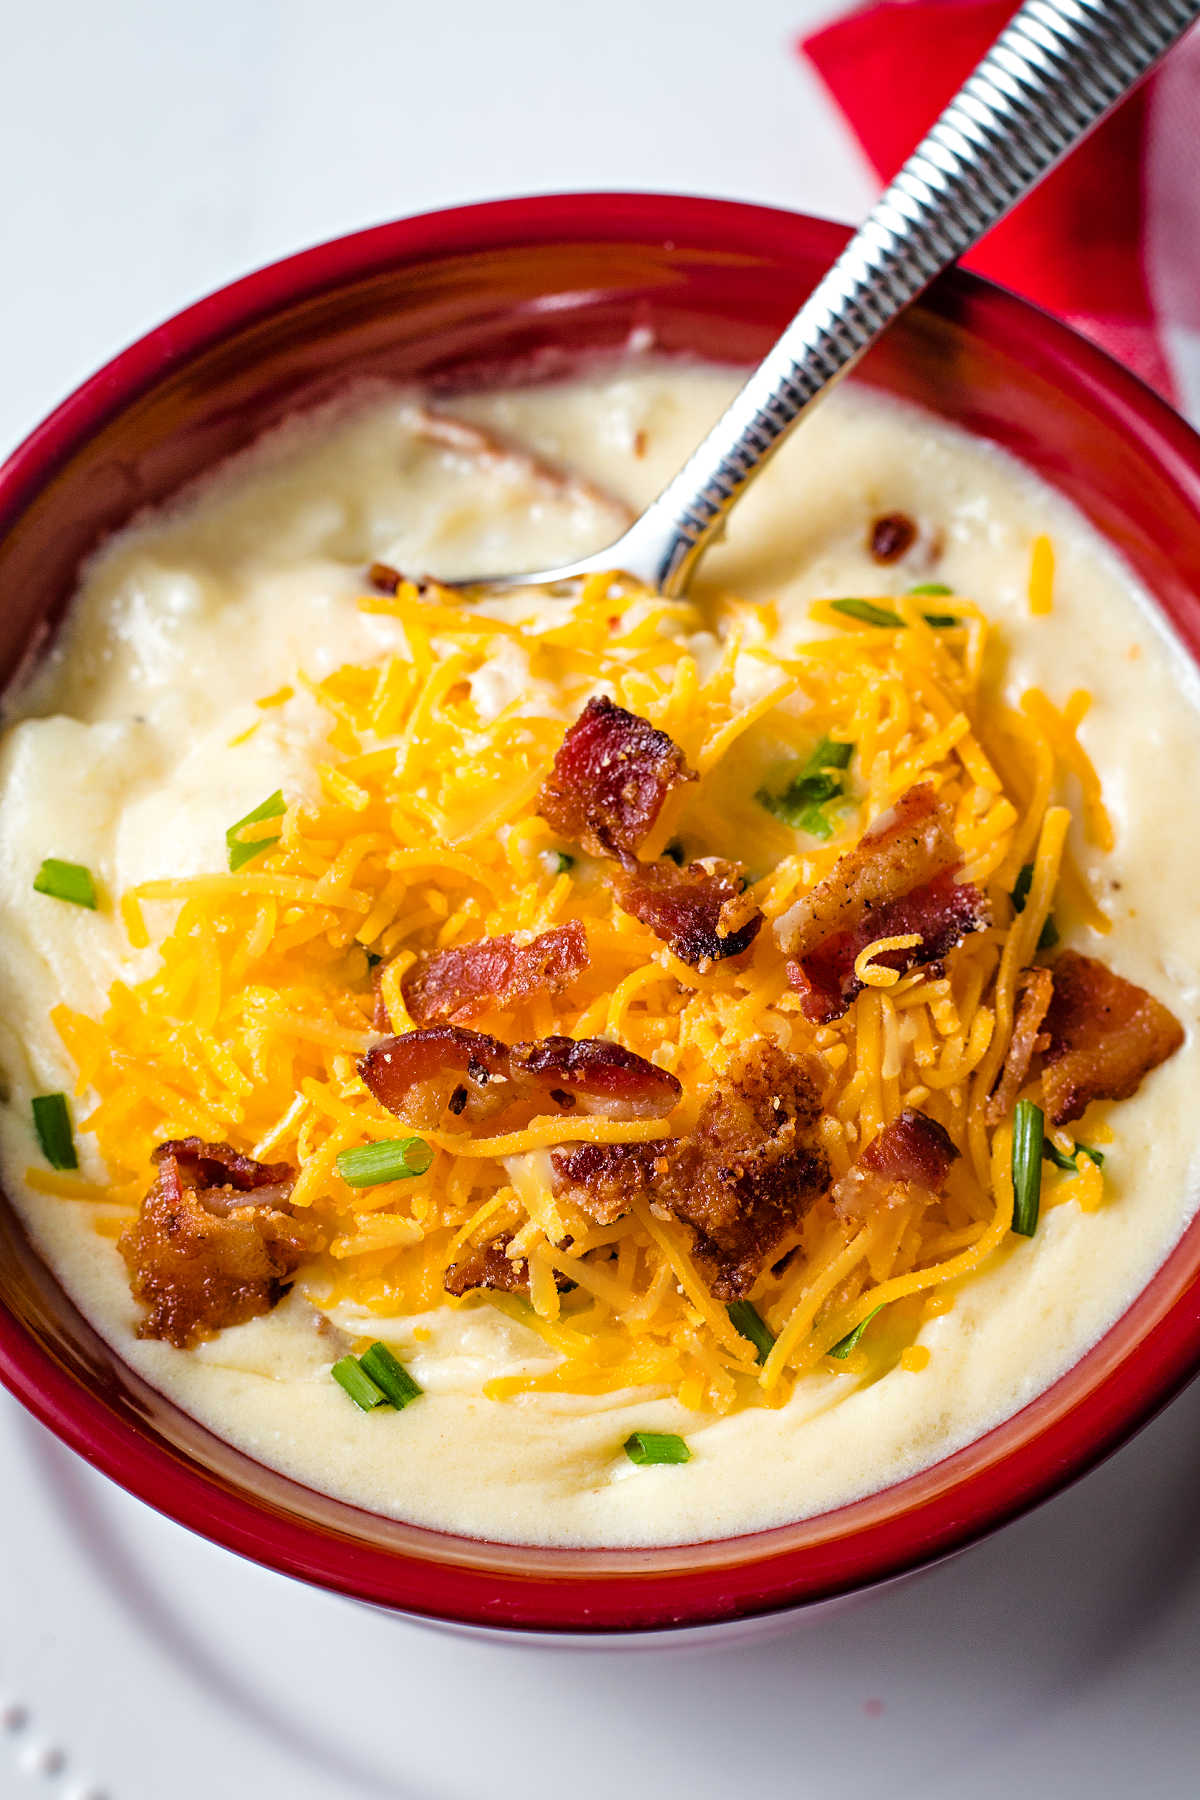 a spoon dipped into a bowl of loaded potato soup sitting on a plate.